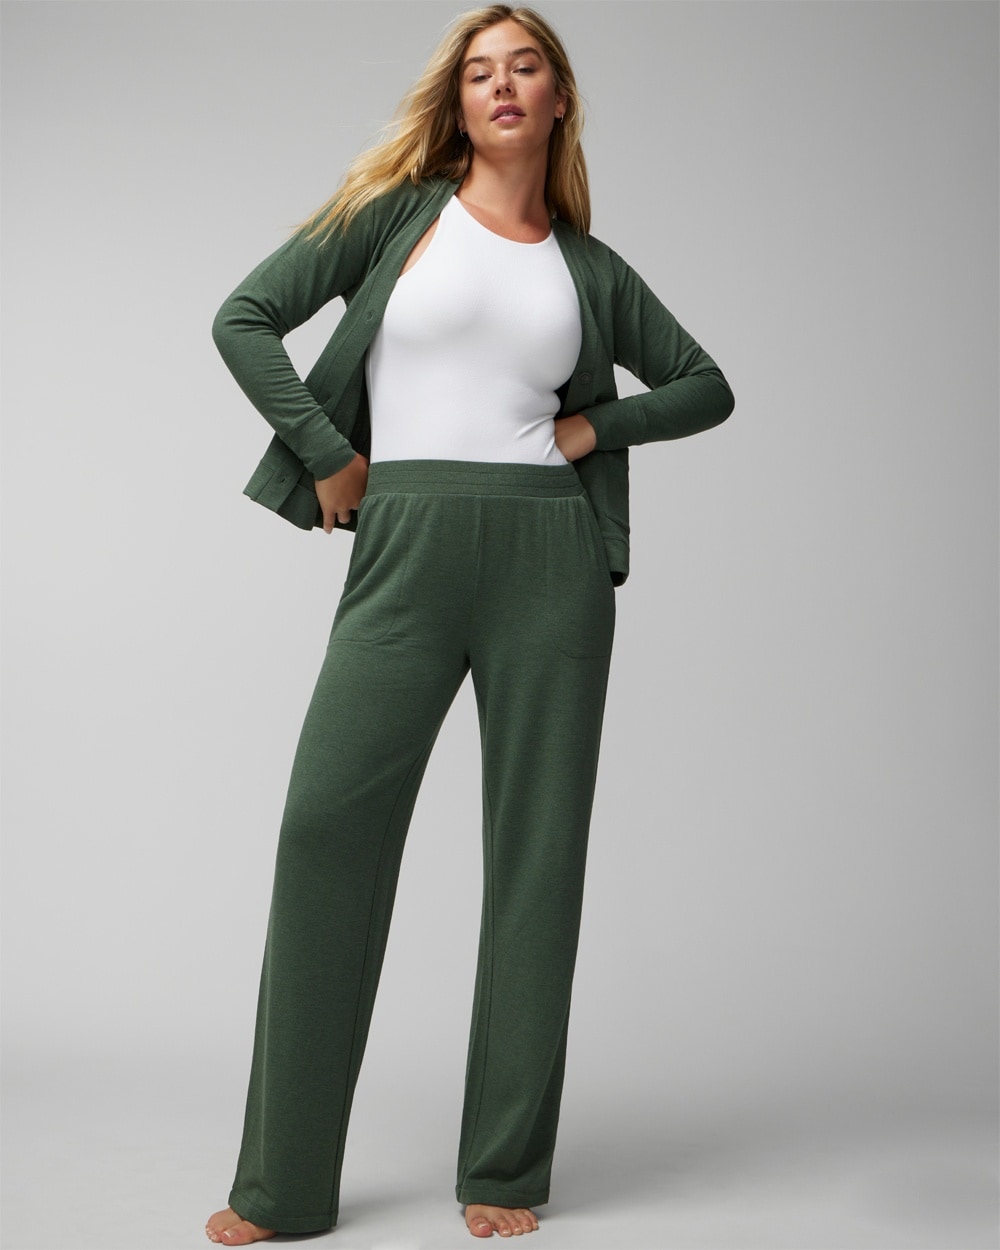 Ultra Soft Fleece Straight-Leg Pants video preview image, click to start video